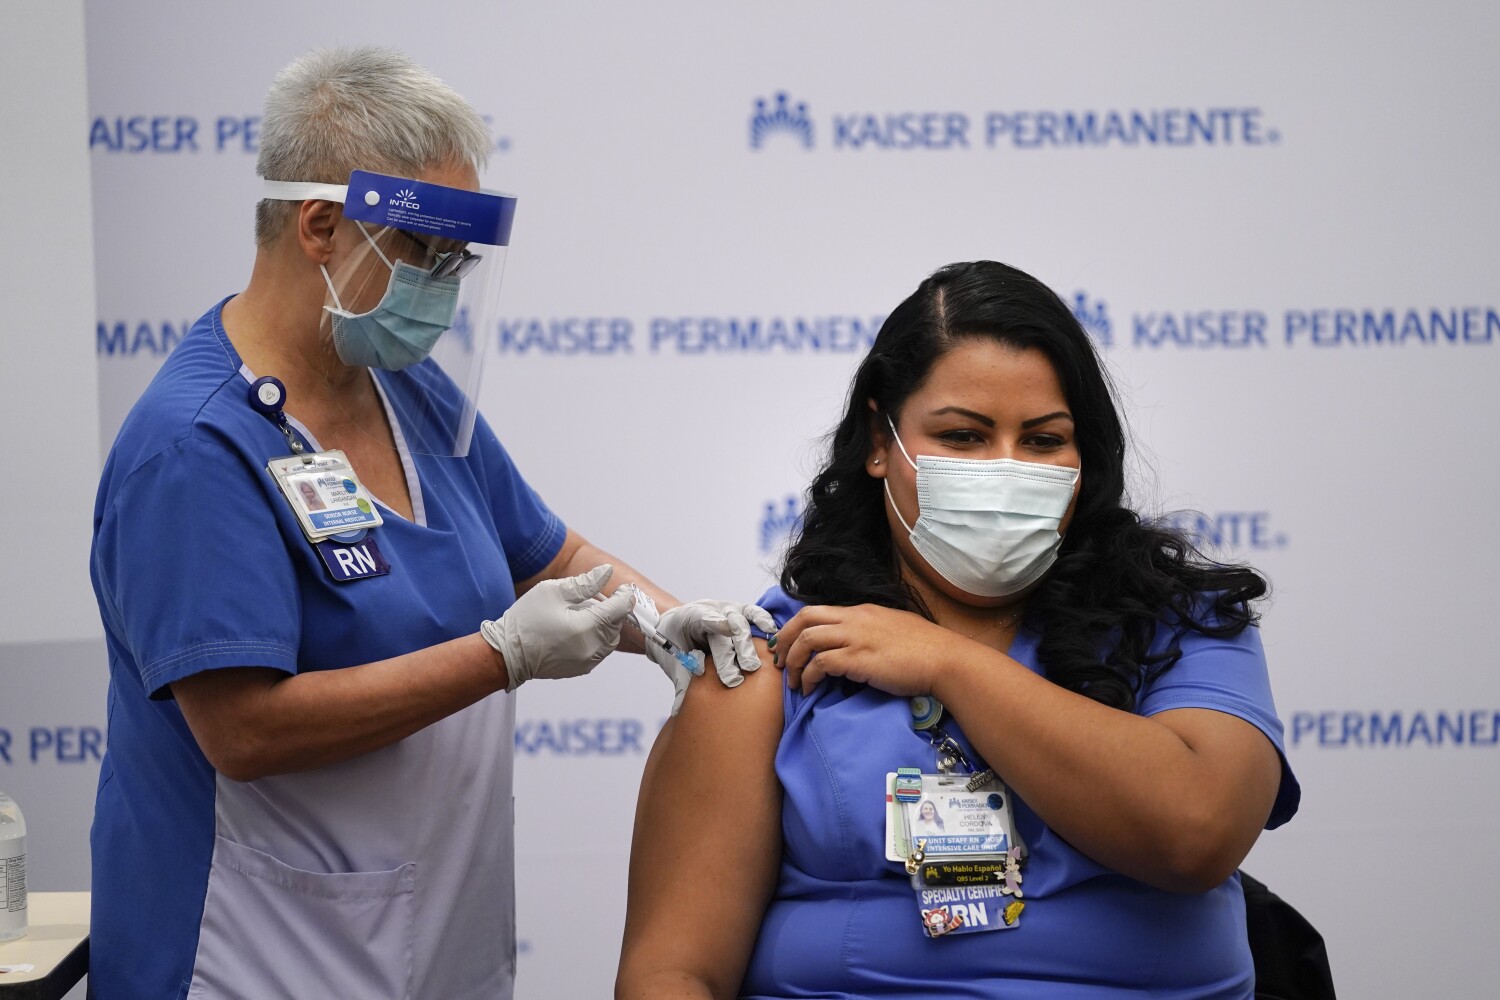 COVID-19 vaccinations begin in California as L.A. healthcare workers among first to get dose